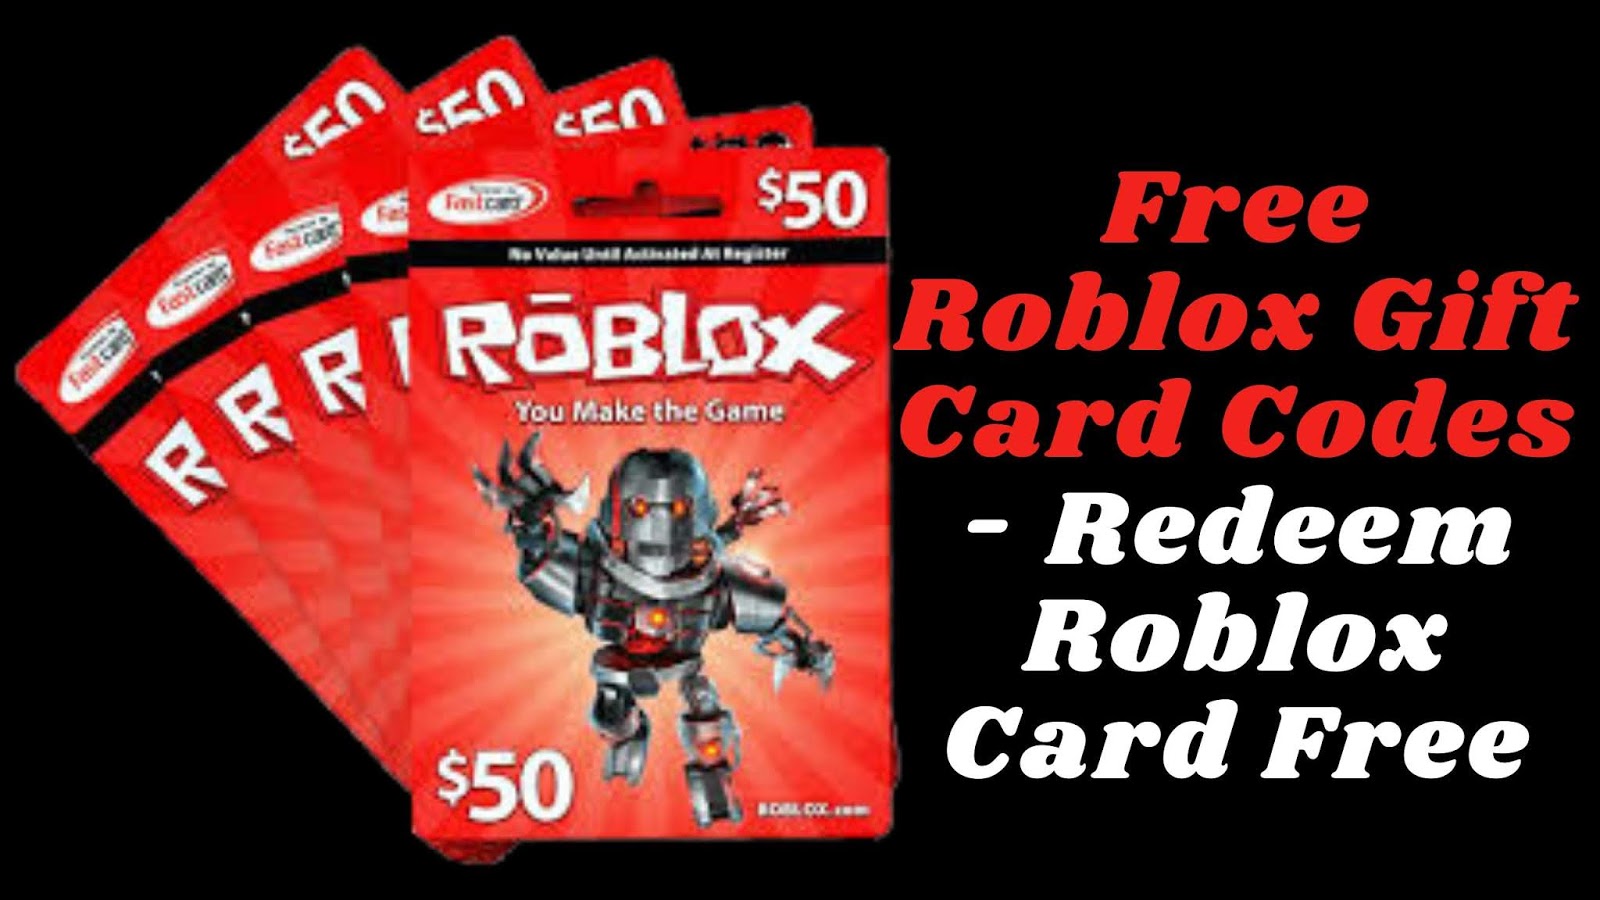 Free Gift Cards Free Roblox Gift Card Codes Redeem Roblox Card Free - redeem roblox cards codes free